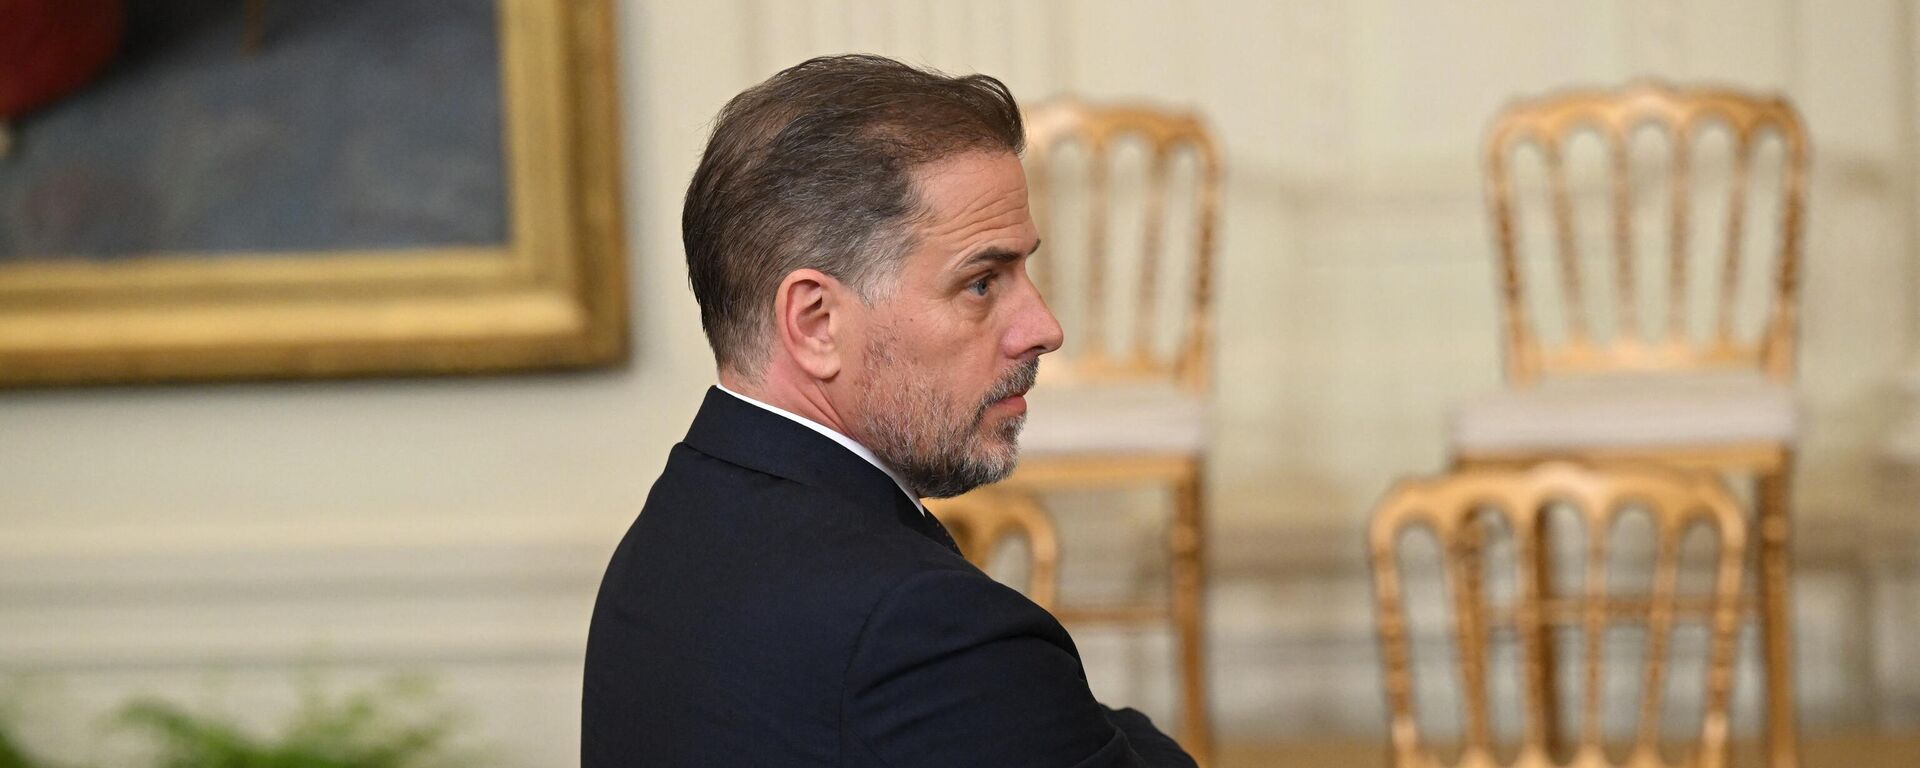 Hunter Biden attends a Presidential Medal of Freedom ceremony honoring 17 recipients, in the East Room of the White House in Washington, DC, July 7, 2022 - Sputnik International, 1920, 04.08.2022